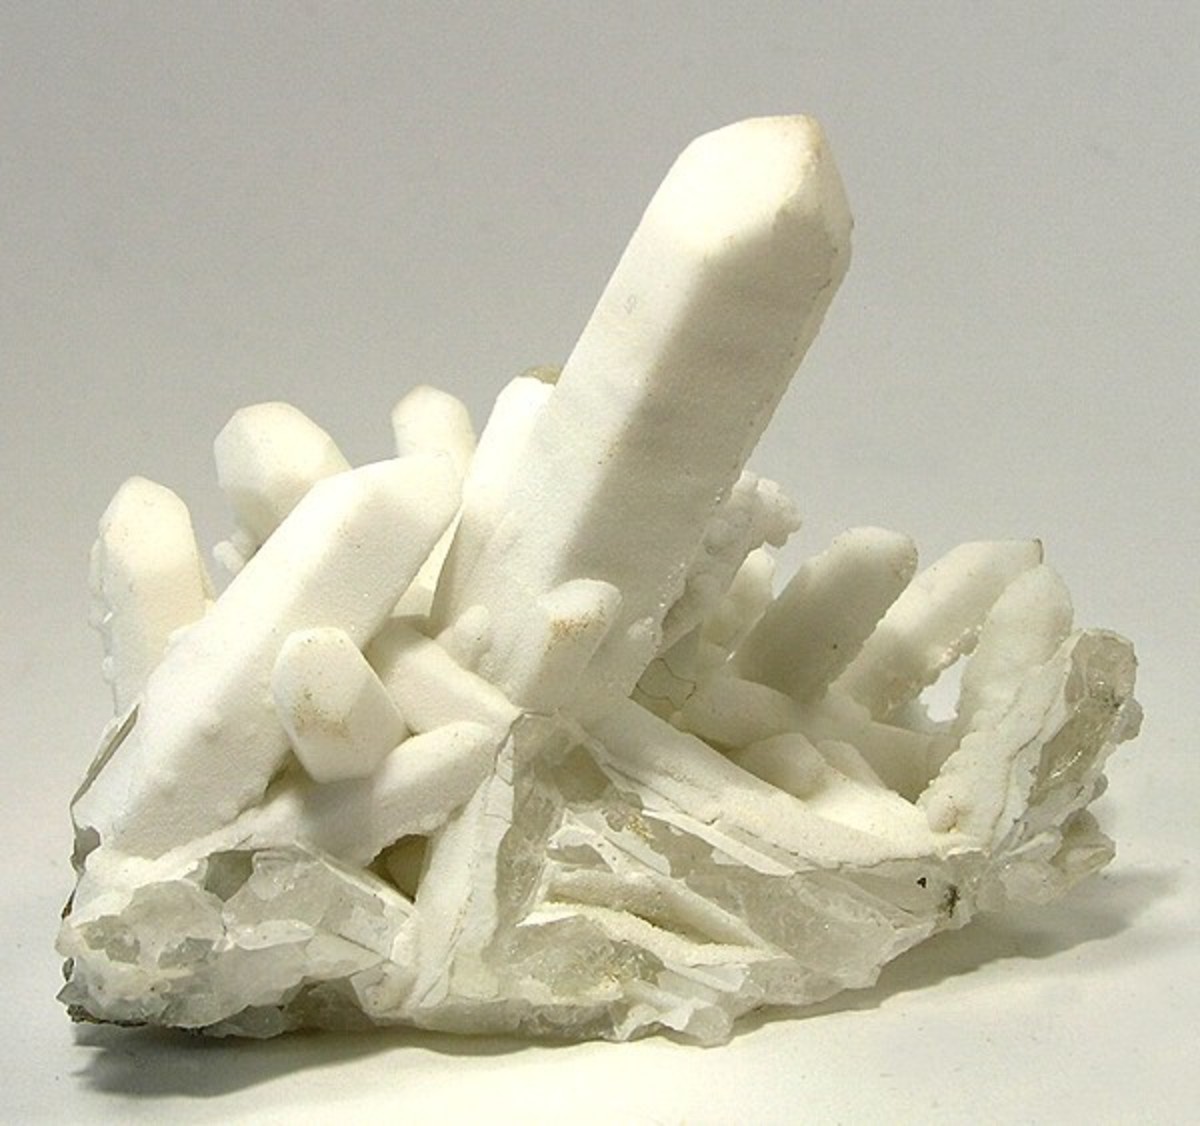 Snow quartz is a healing crystal with a gentle but effective energy.